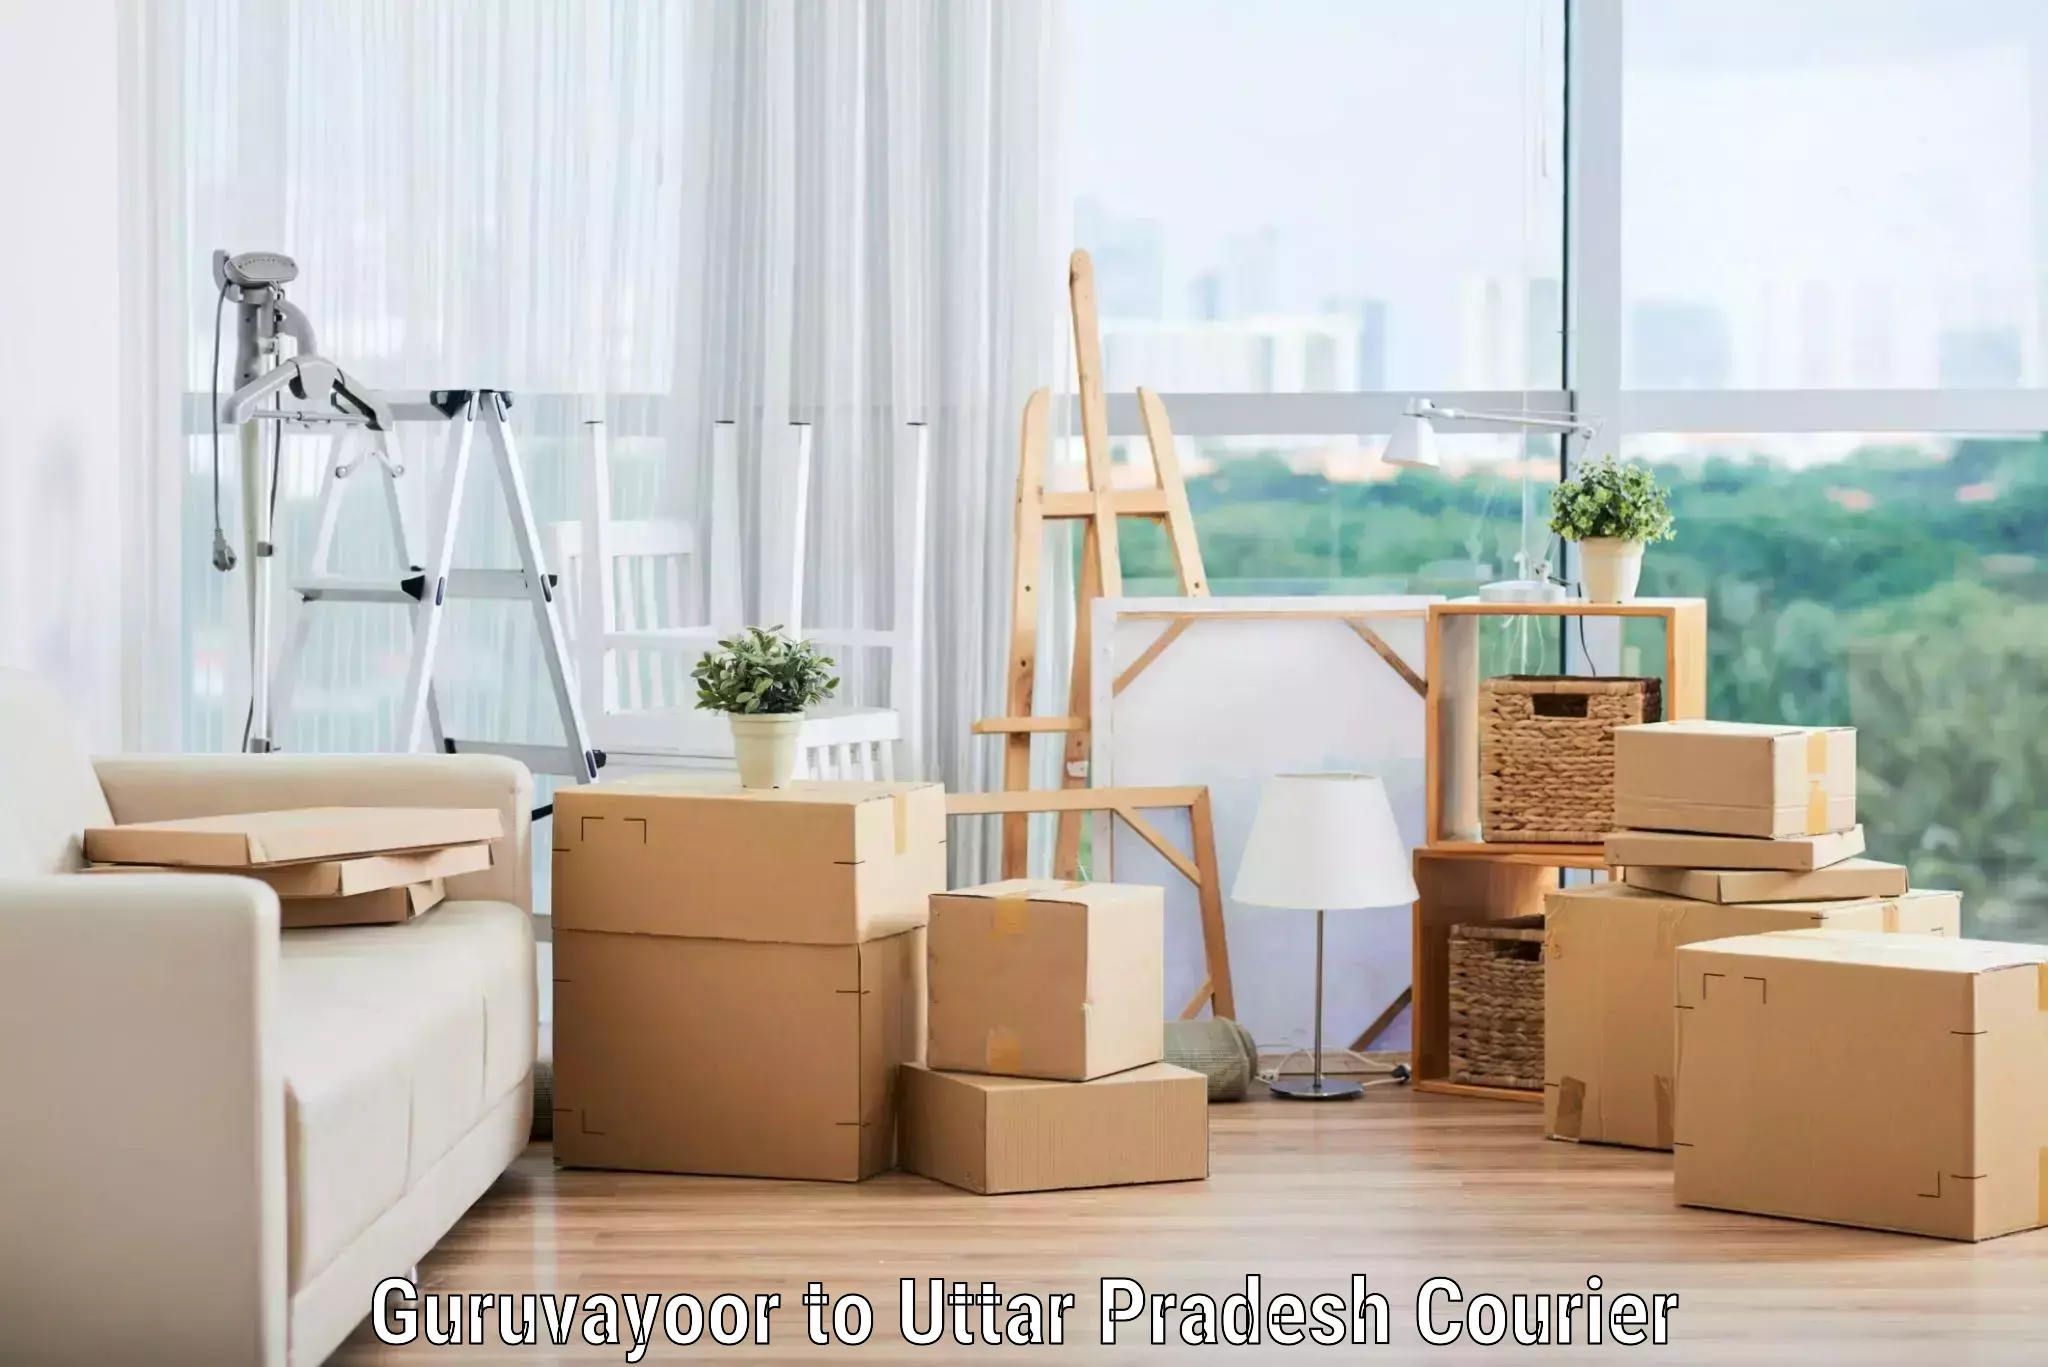 Efficient moving company in Guruvayoor to Rath